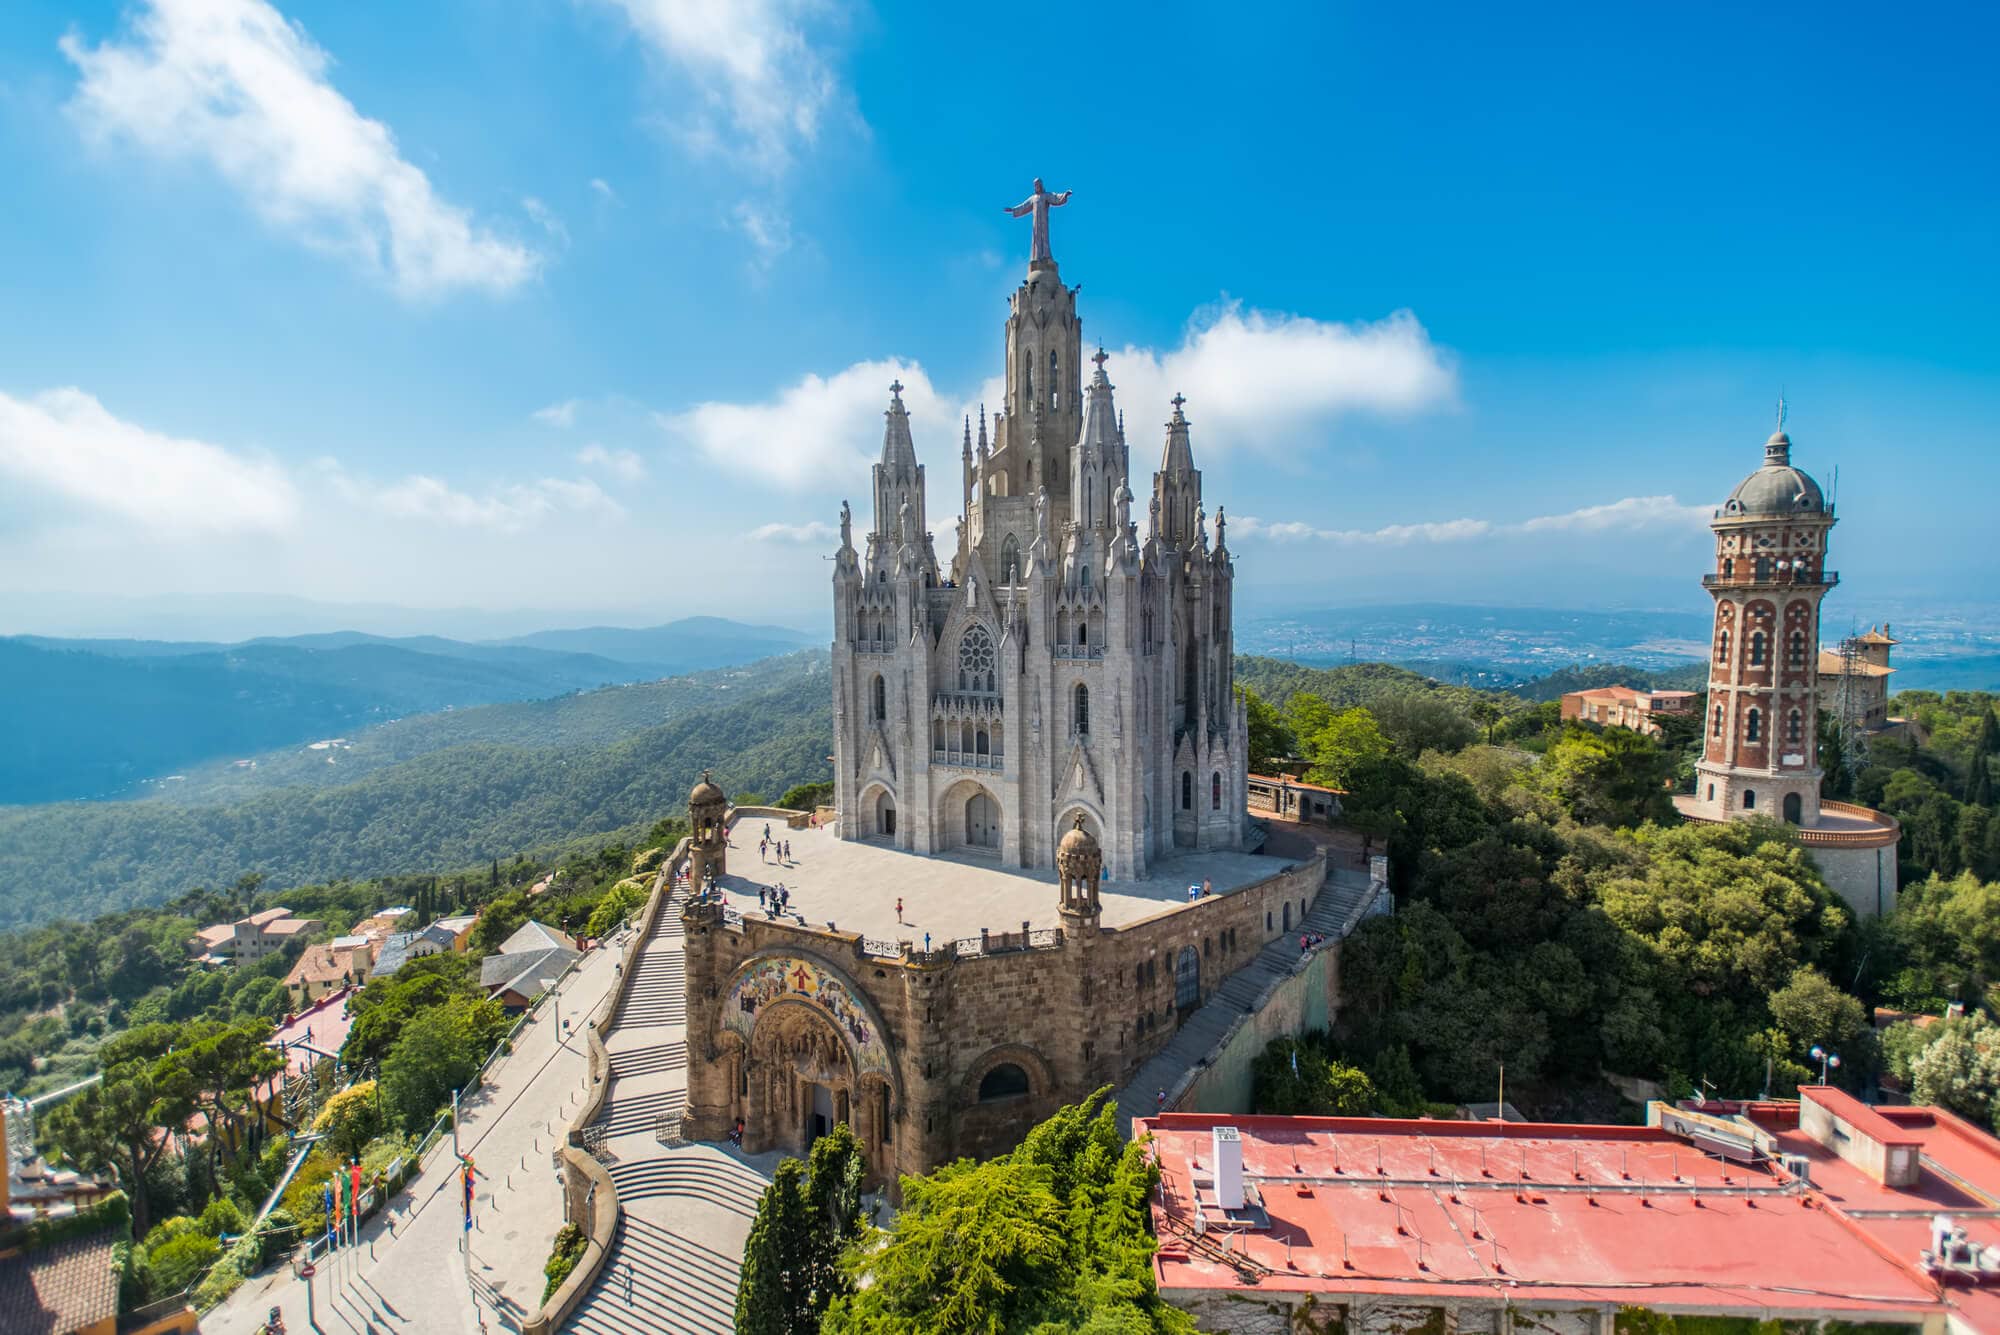 Spain quotes and captions for Instagram - Sagrat Cor, a church on the summit of Mount Tibidabo in Barcelona, Catalonia